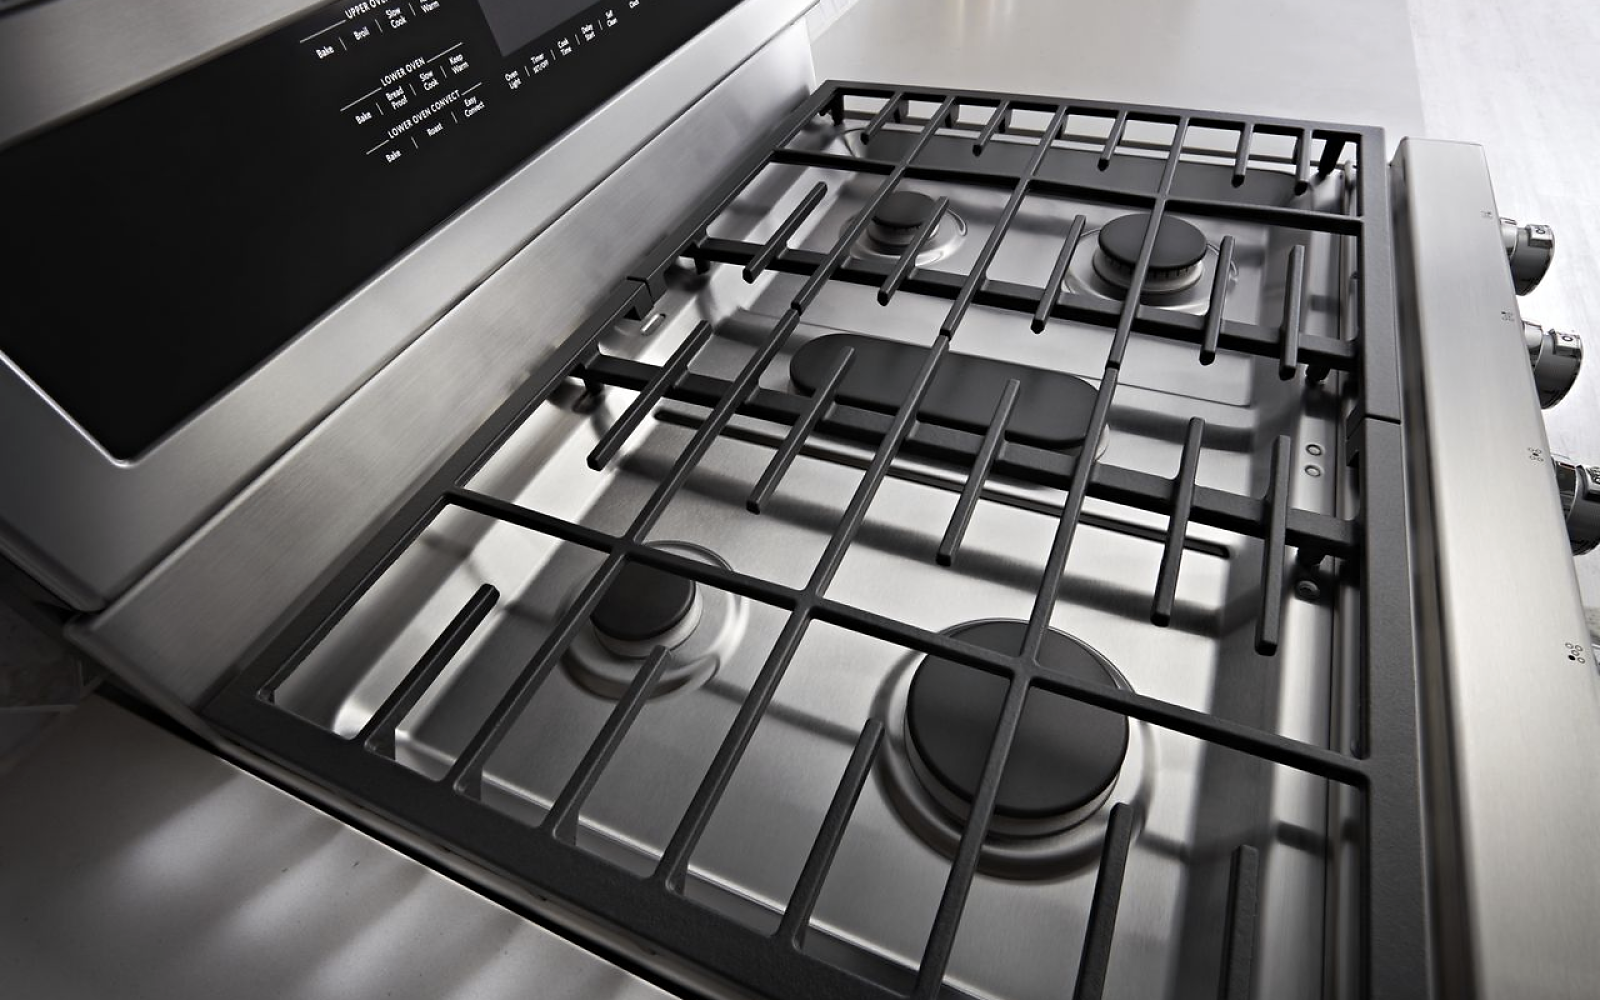 An image of a stainless steel gas cooktop.